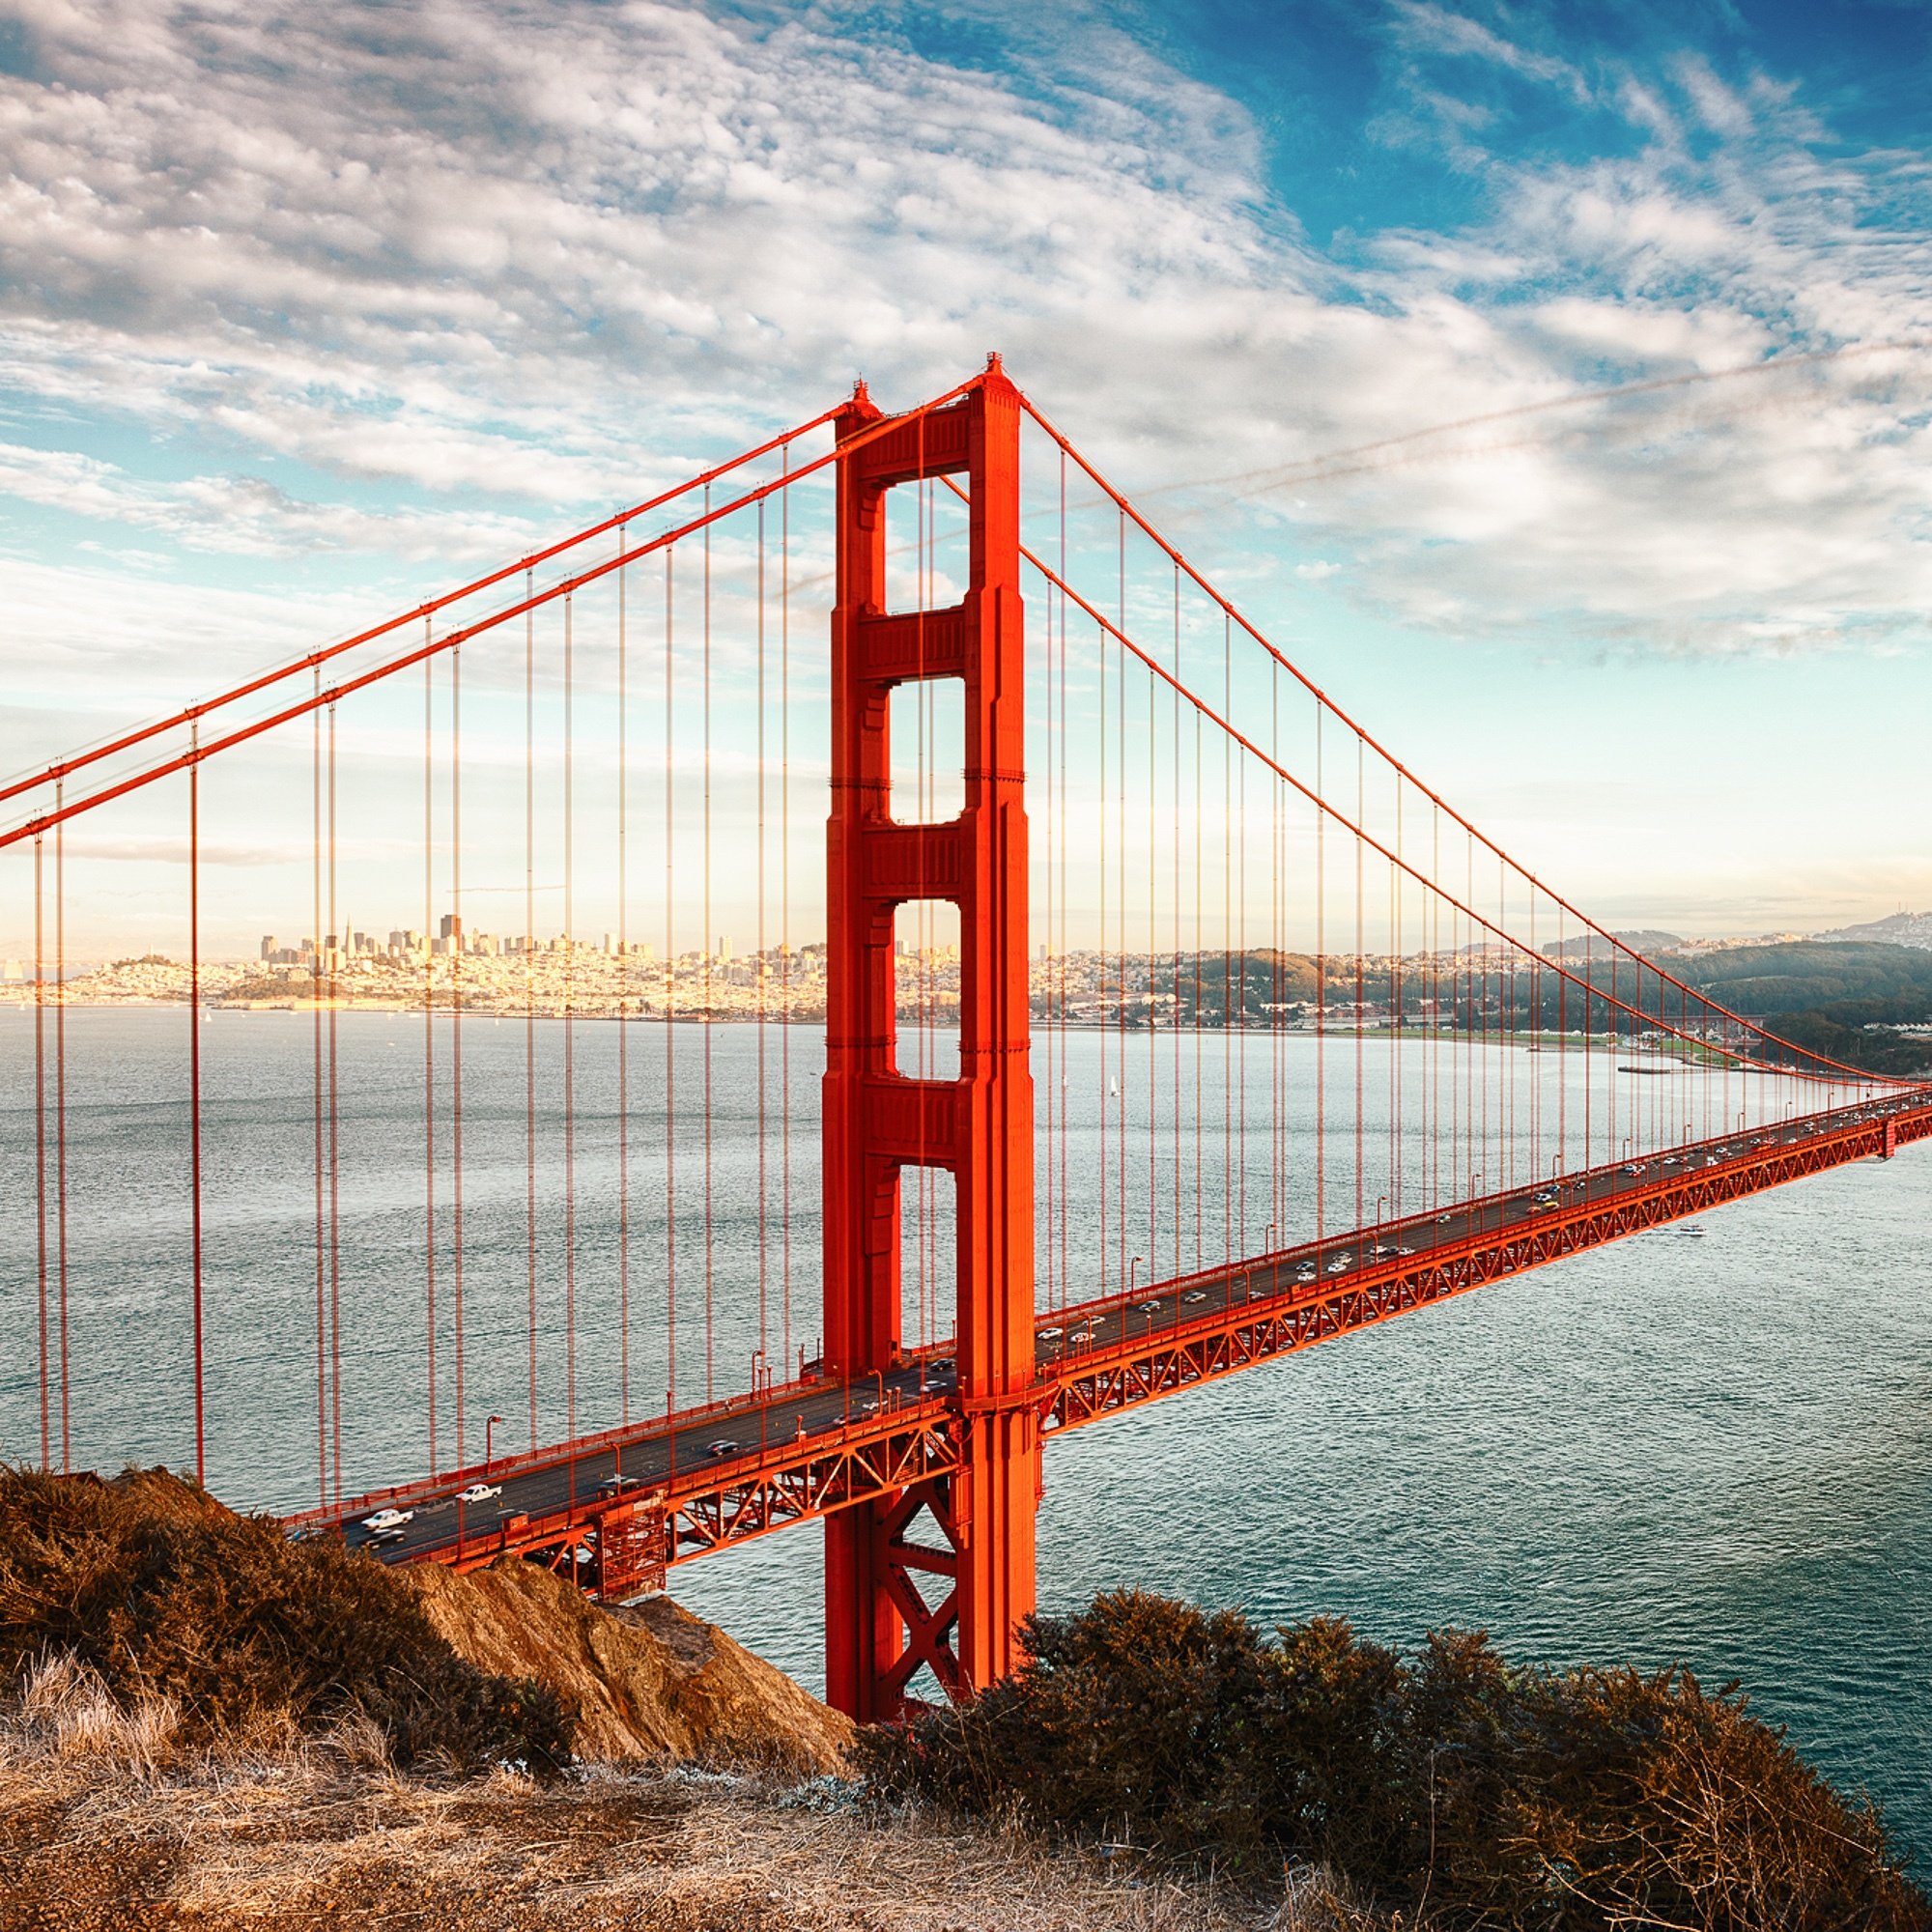 How long did it take to build the Golden Gate Bridge?